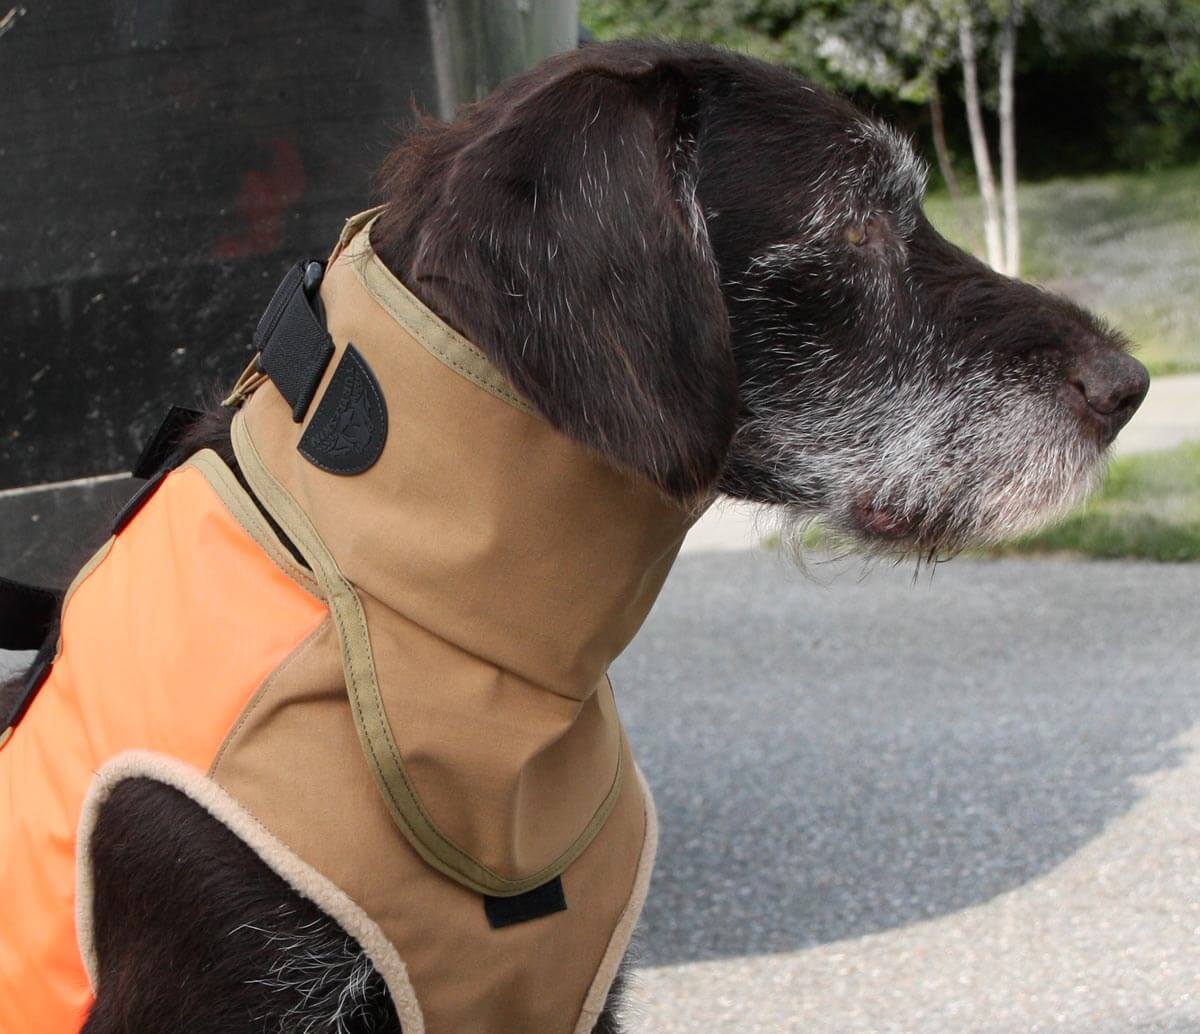 dog armour PRO - Sleeve and leg protections